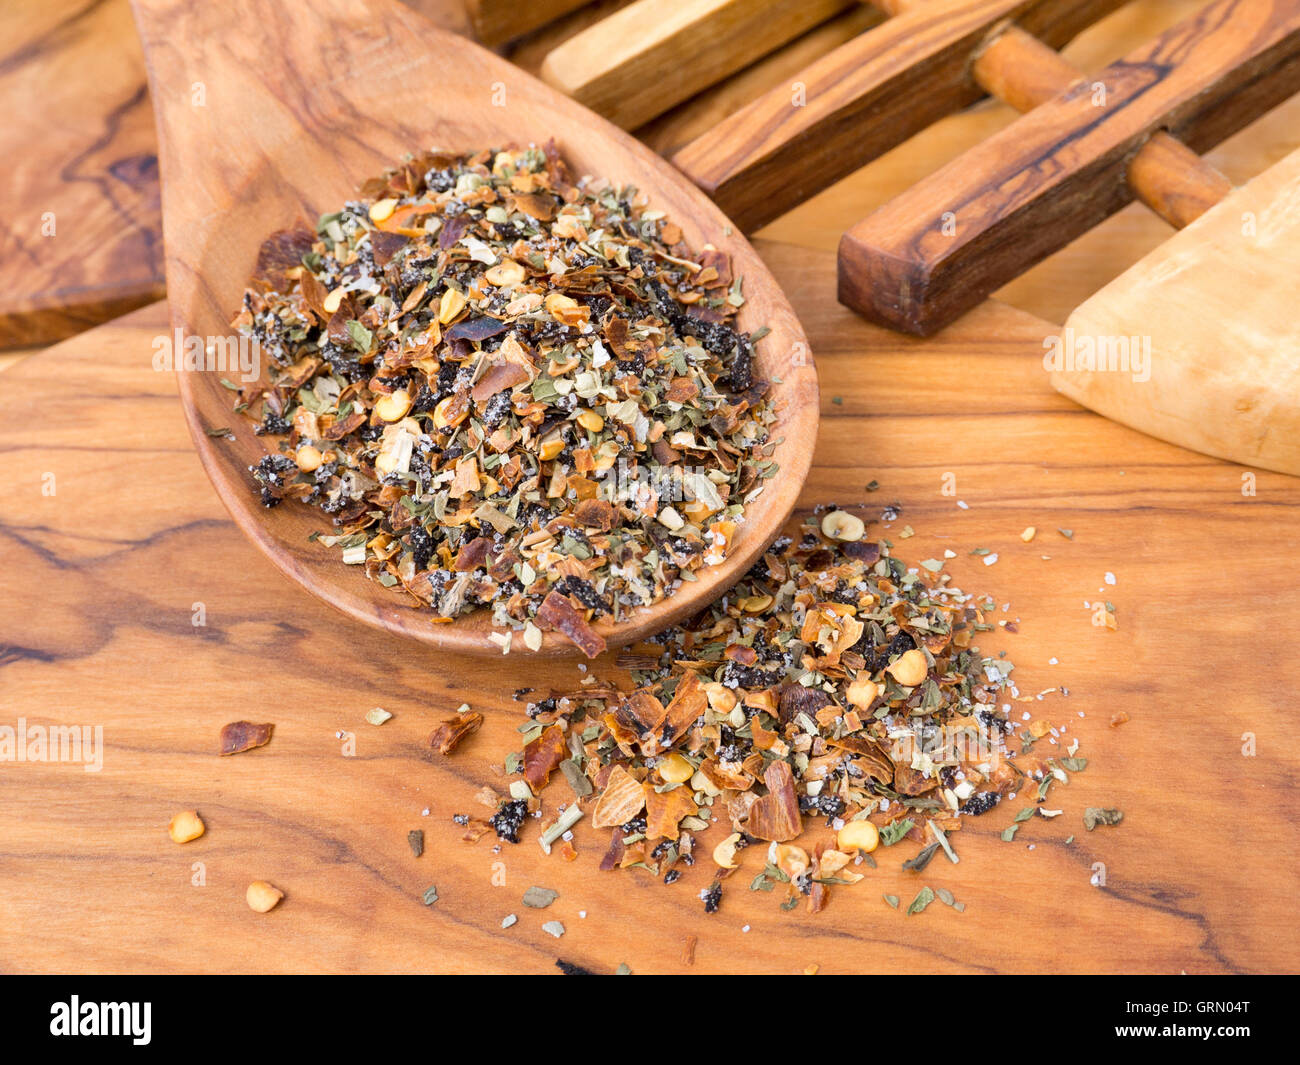 Herbal seasoning in the wooden spoon on the olive wood cutting board Stock Photo